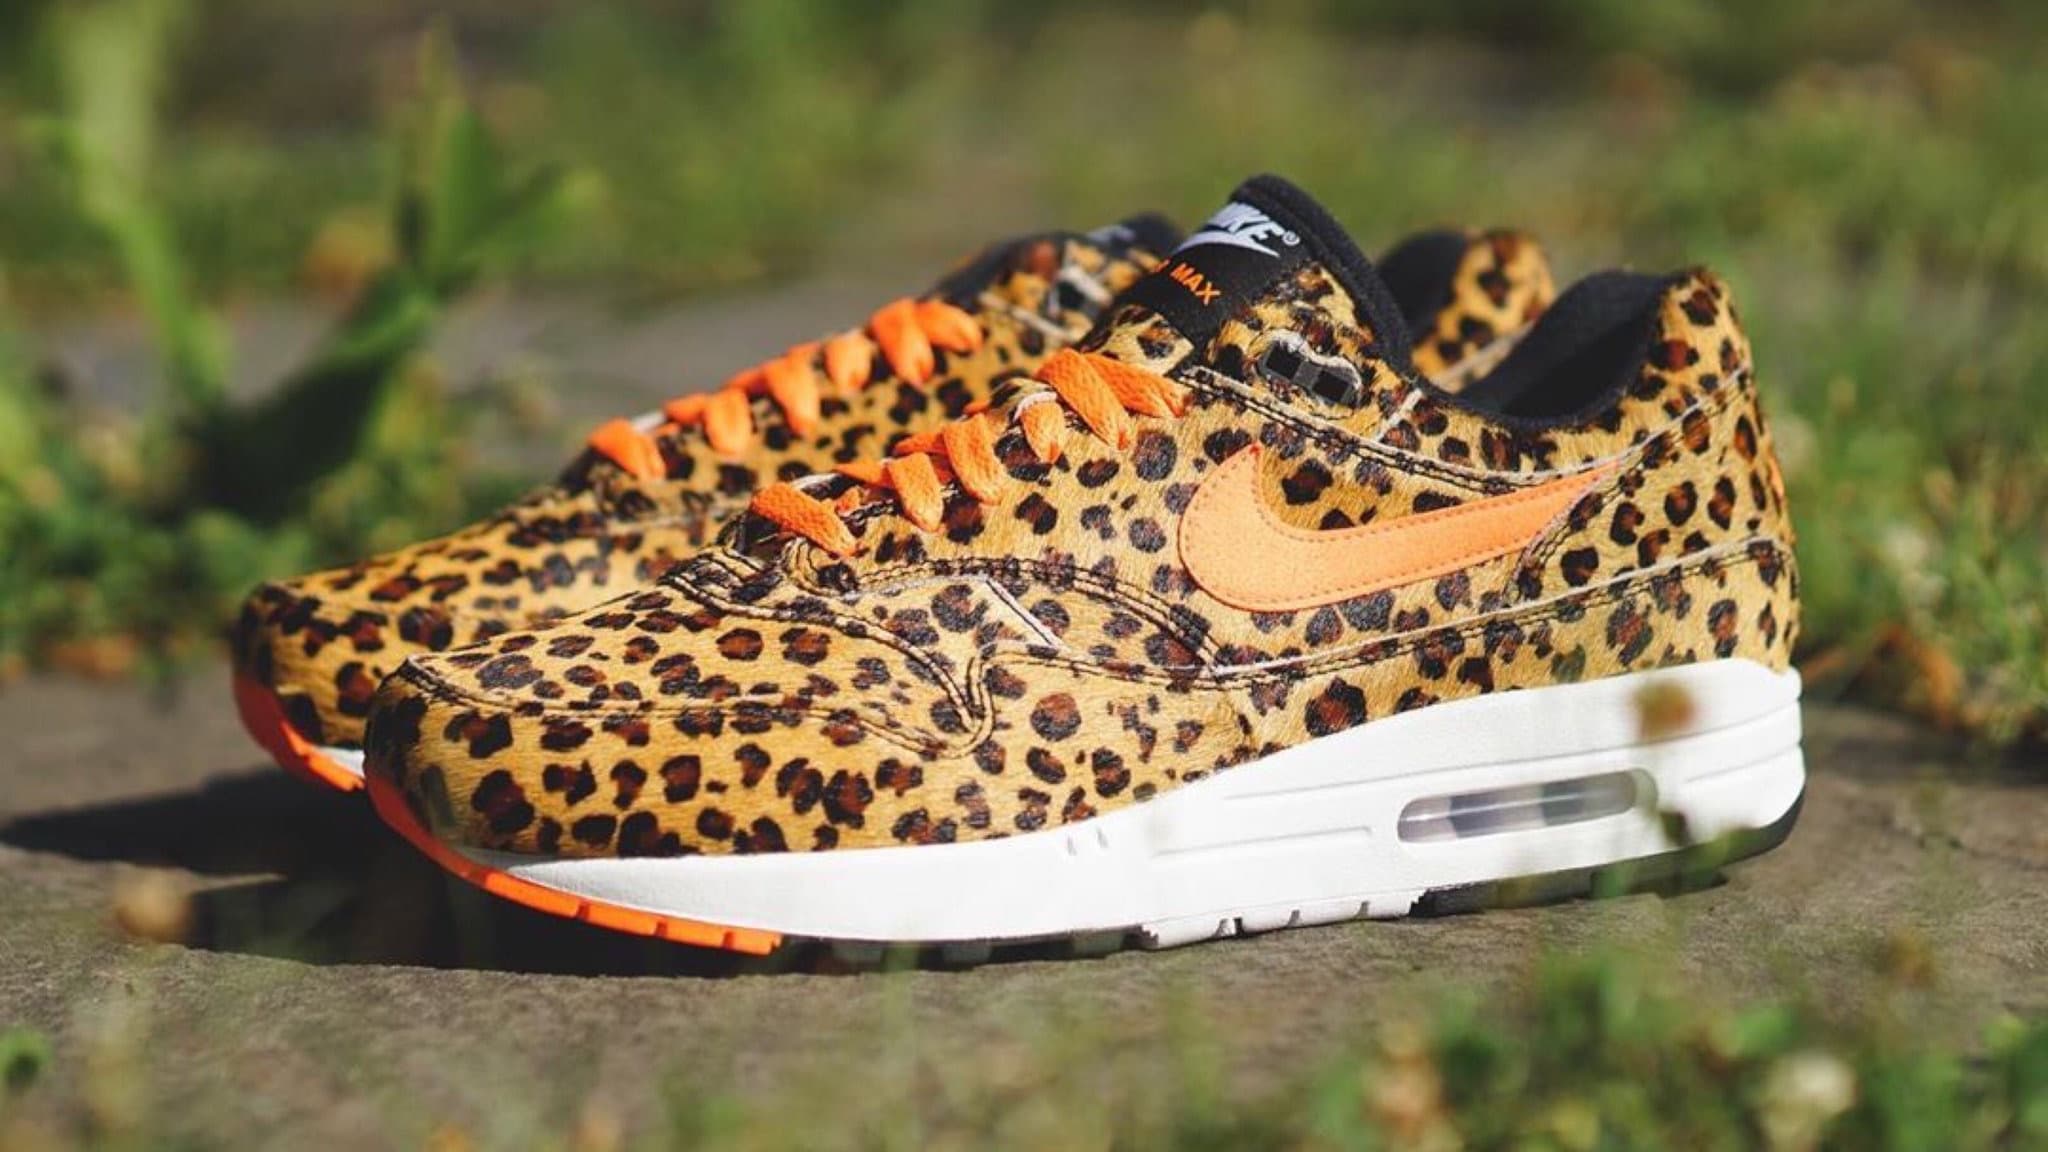 beginnen cocaïne limiet Atmos' Nike Air Max 1 'Animal 3.0' Pack Is Dropping at ComplexCon Chicago |  Complex